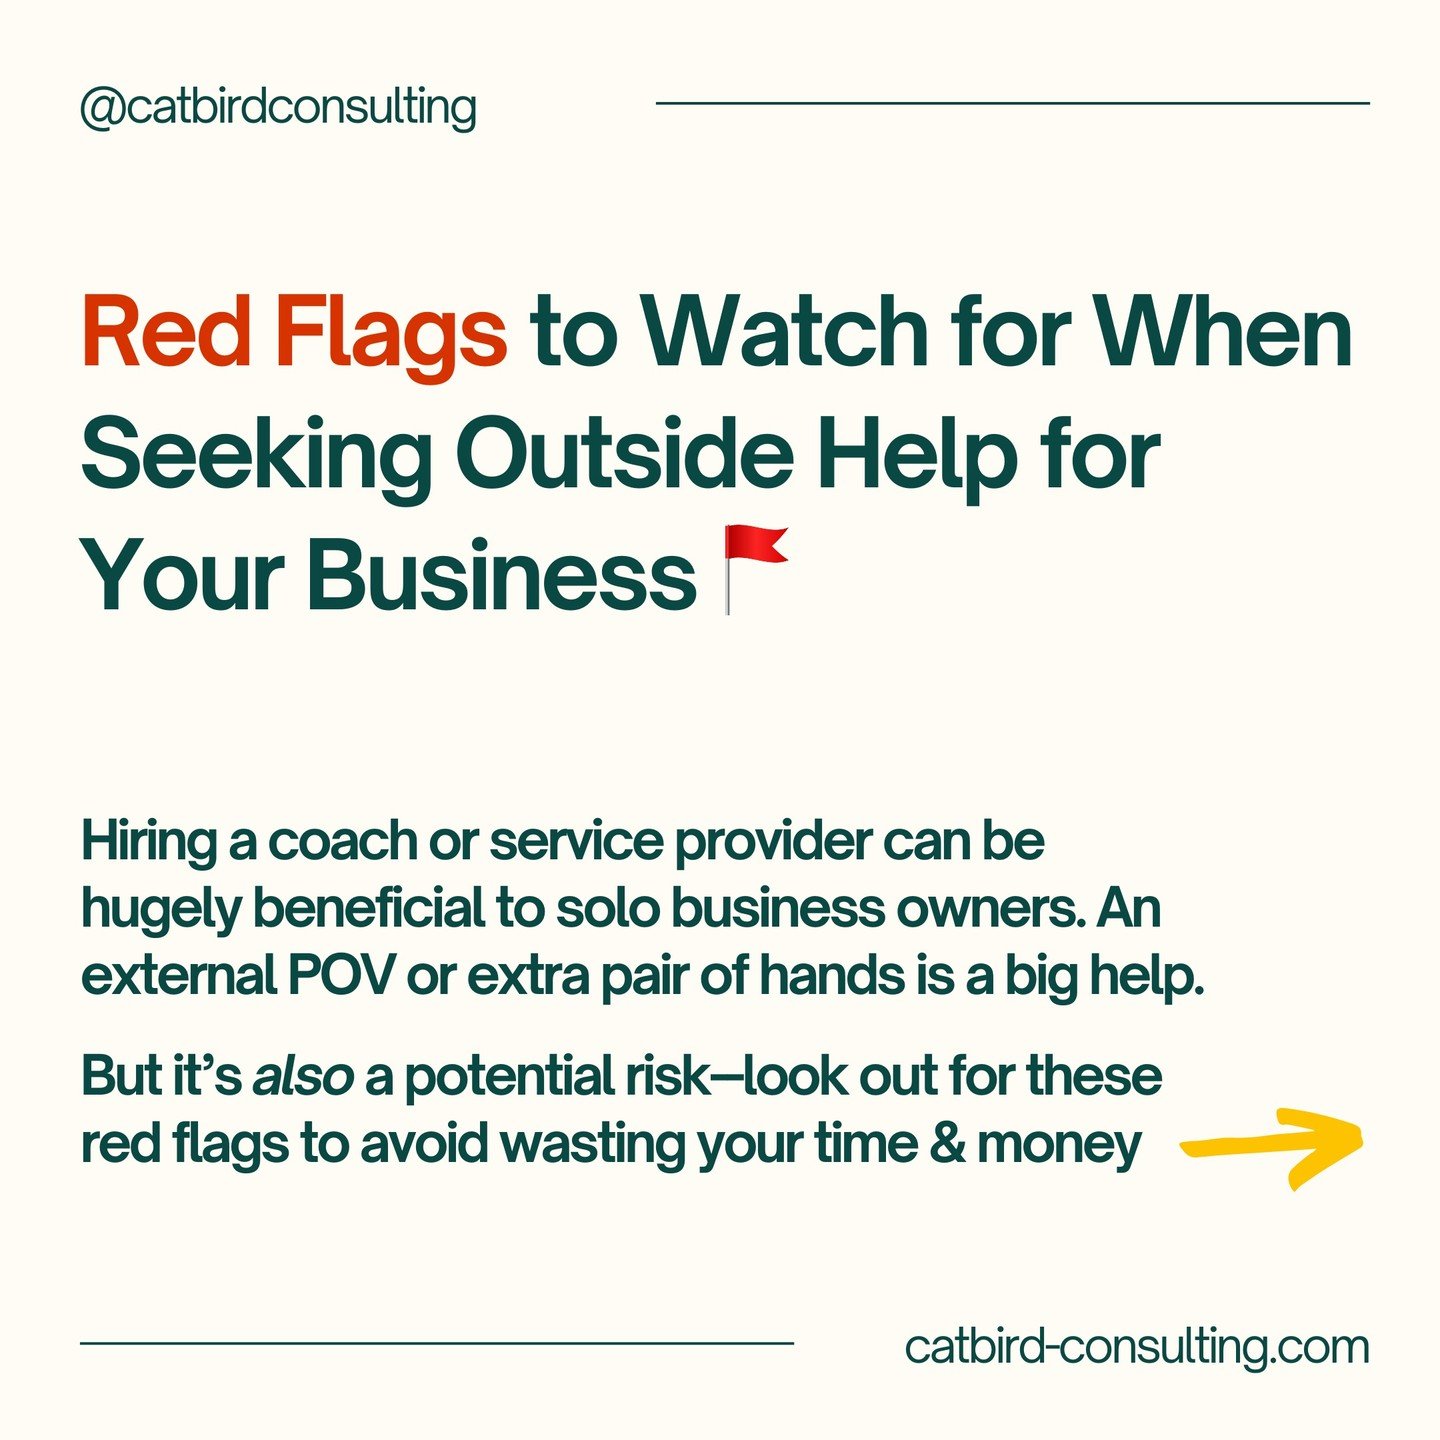 As a solo business owner, you will inevitably have things you want to outsource and projects that require expert support.

But opening your business (and your wallet) to outside help can be risky. 

It&rsquo;s critical to really assess someone before